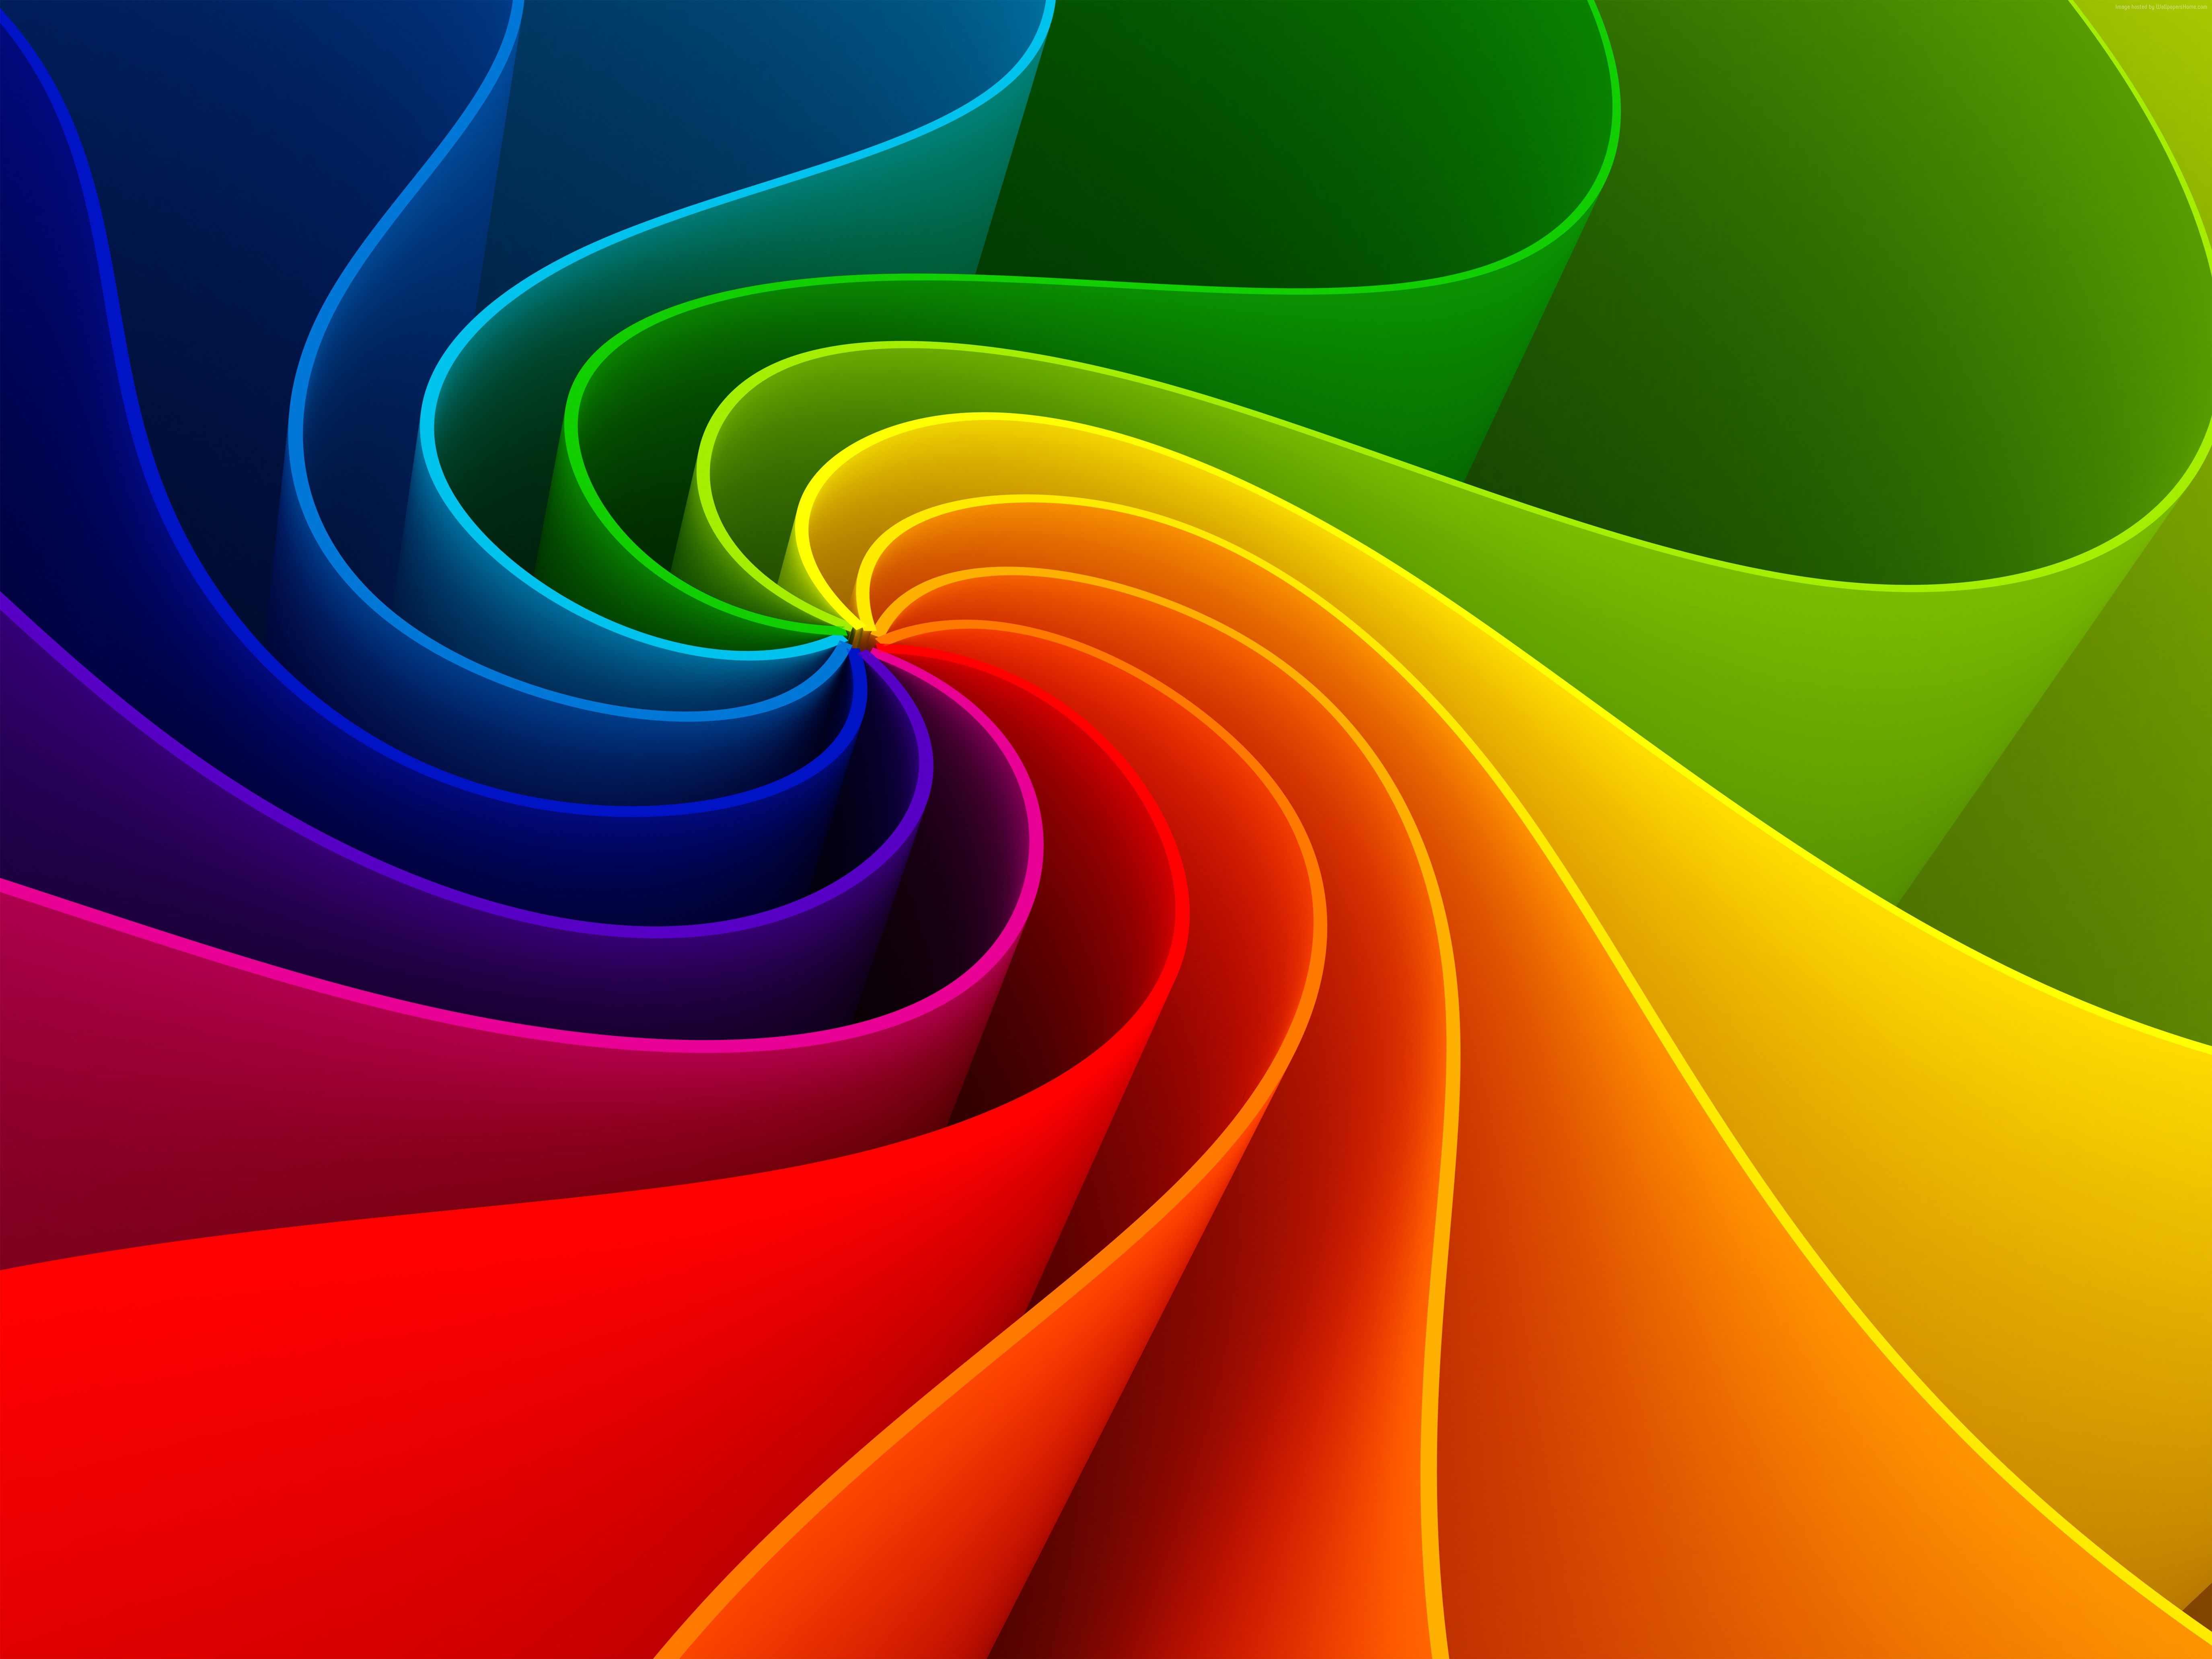 background #pages #rainbow k k k K #wallpaper #hdwallpaper #desktop. Rainbow abstract, Rainbow wallpaper, Abstract wallpaper